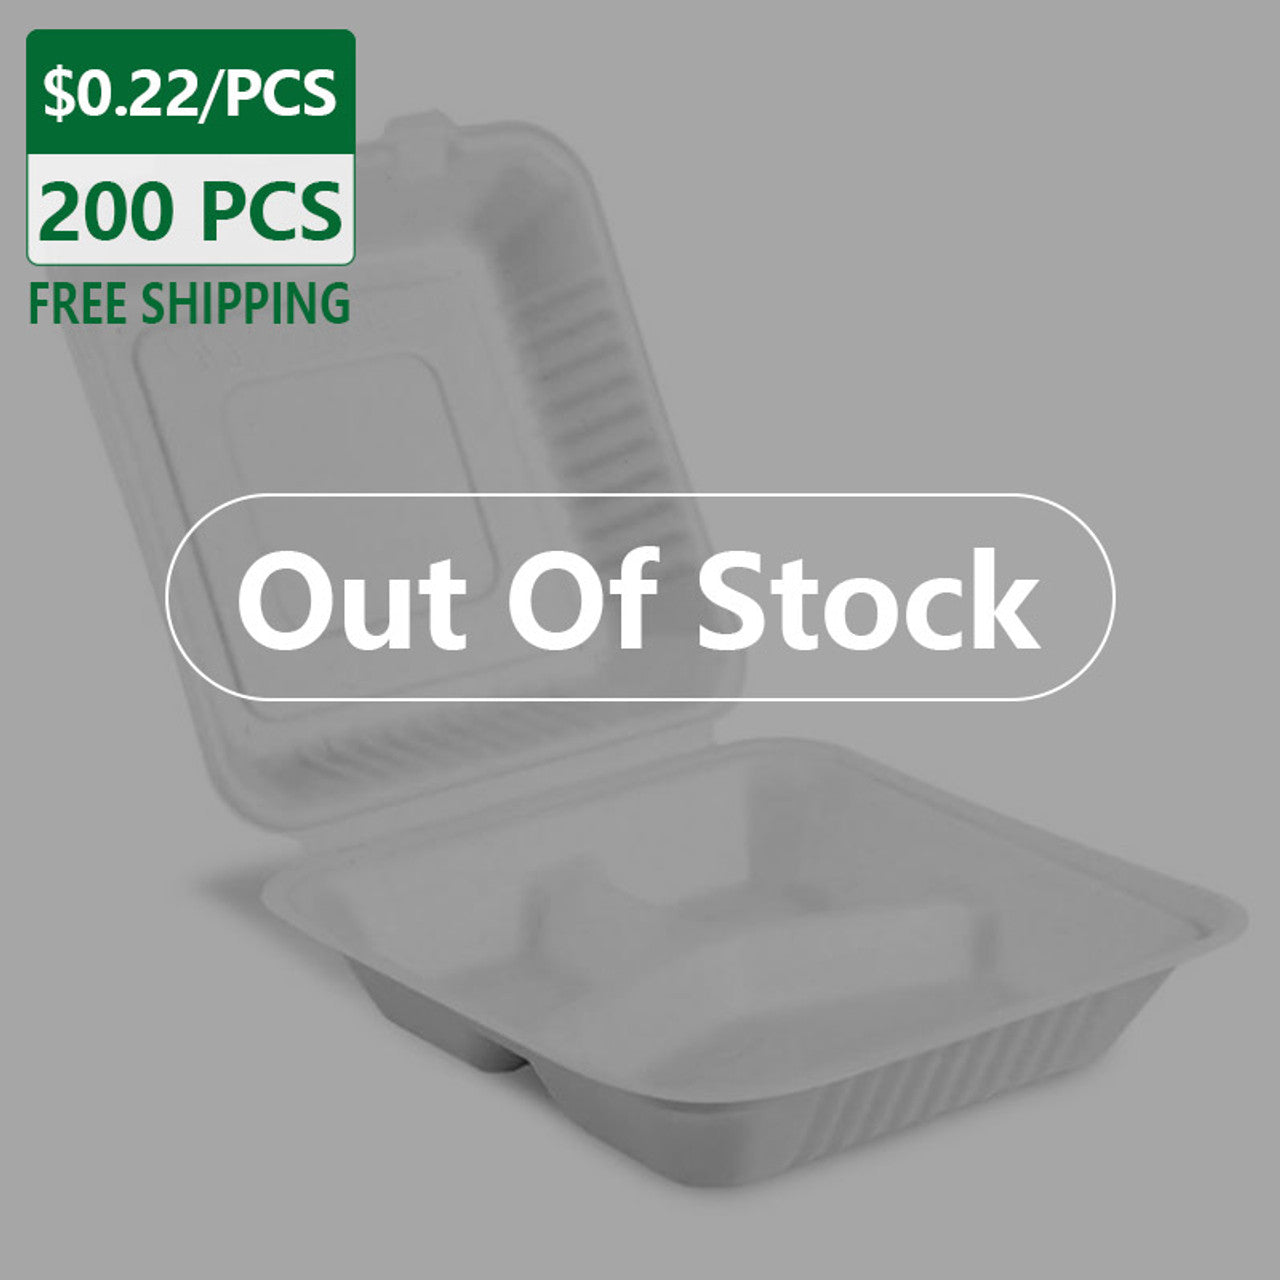 8"x8"x3" 3 Compartment Clamshell To-go Containers White 200 pcs